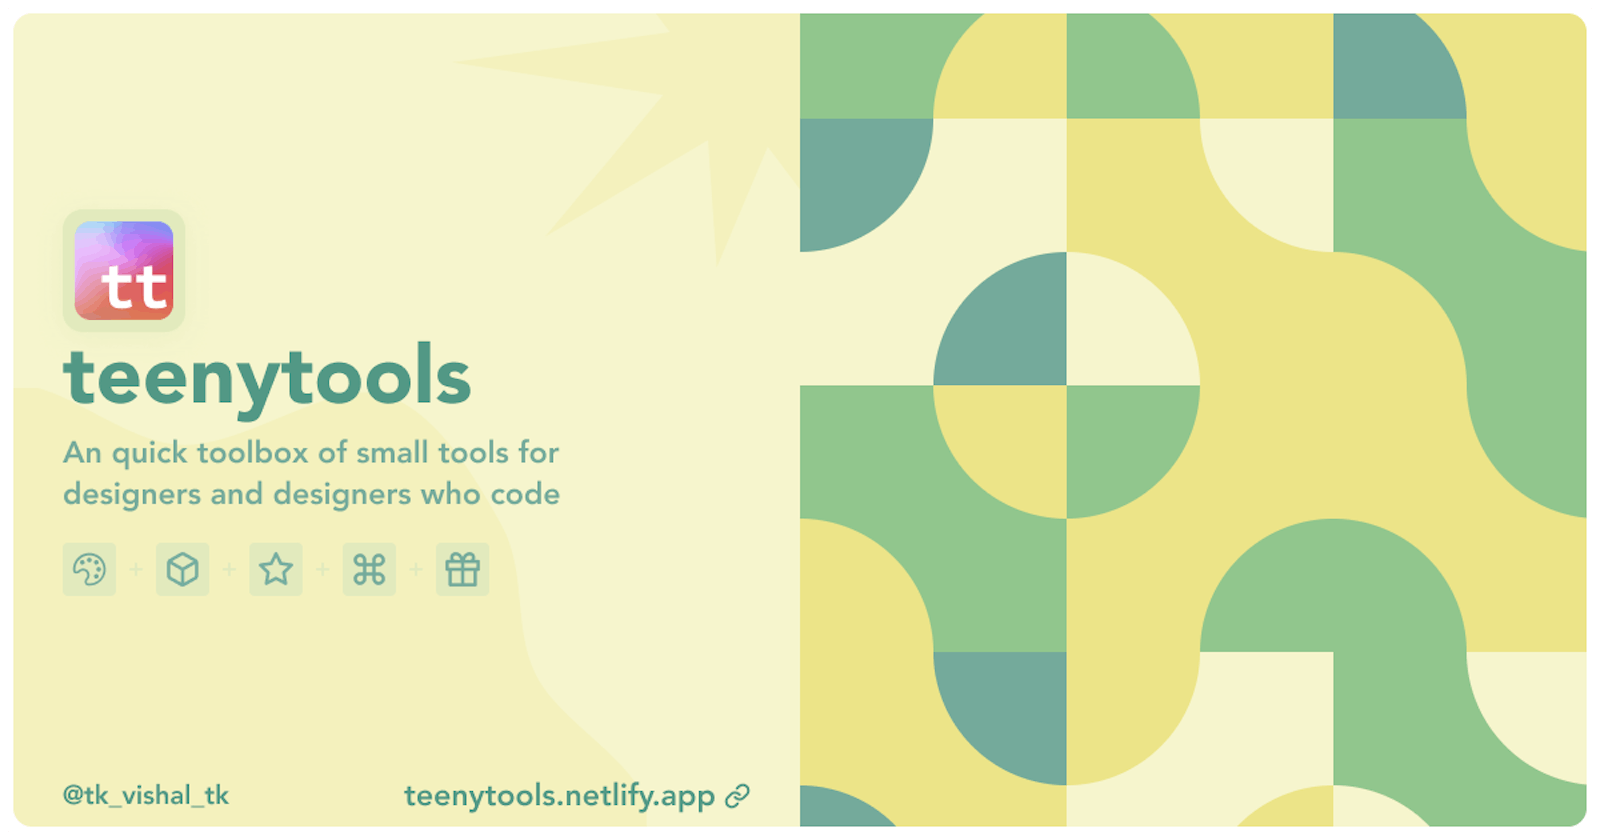 teenytools - A quick all-in-one toolbox of small tools for designers and designers who code